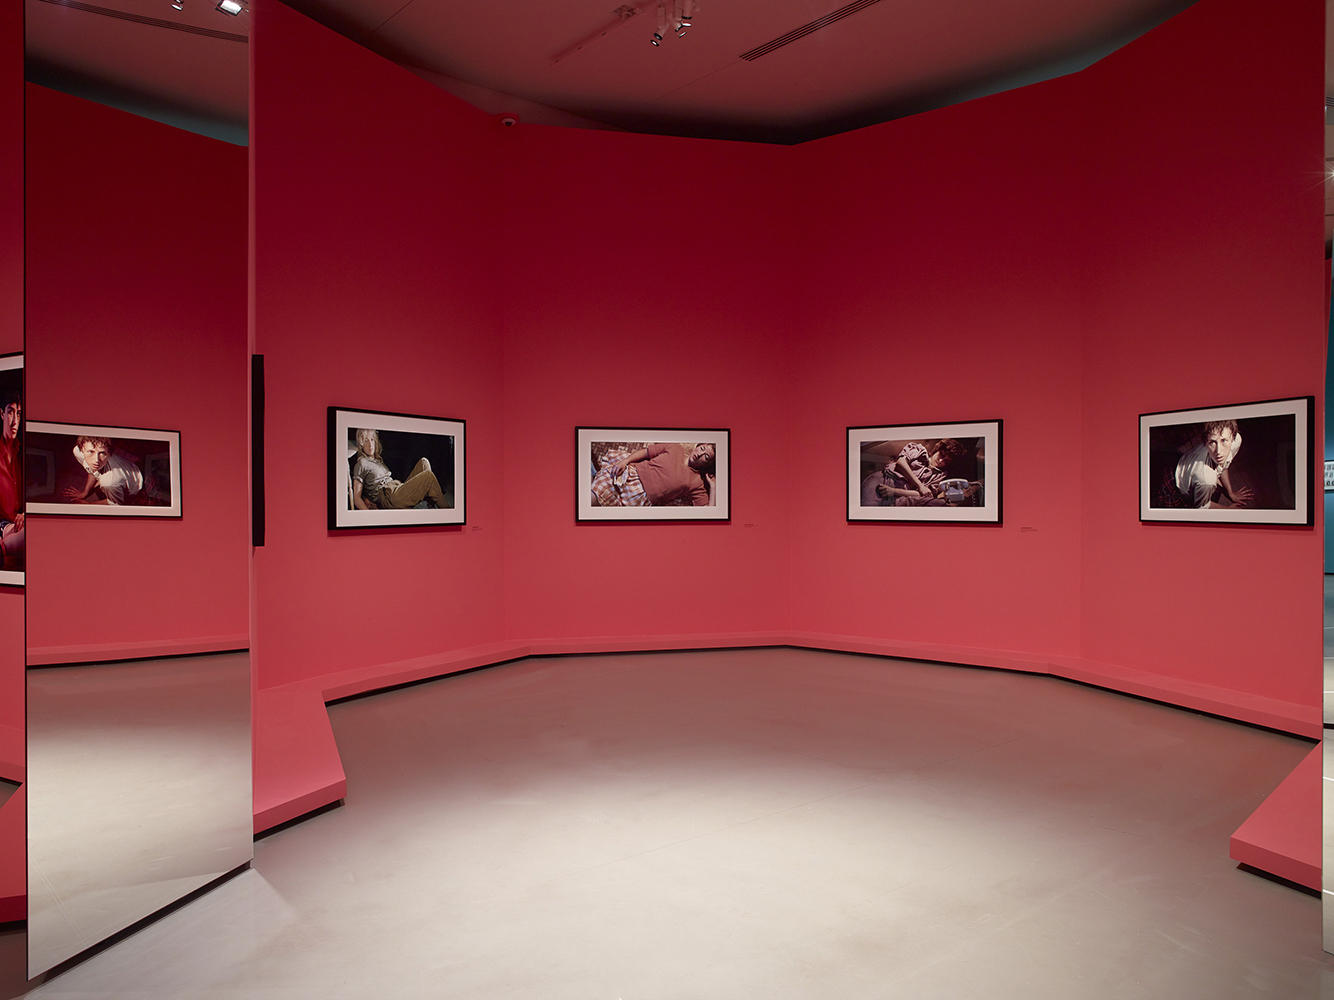 Cindy Sherman at the Foundation Louis Vuitton - Terrance - Your